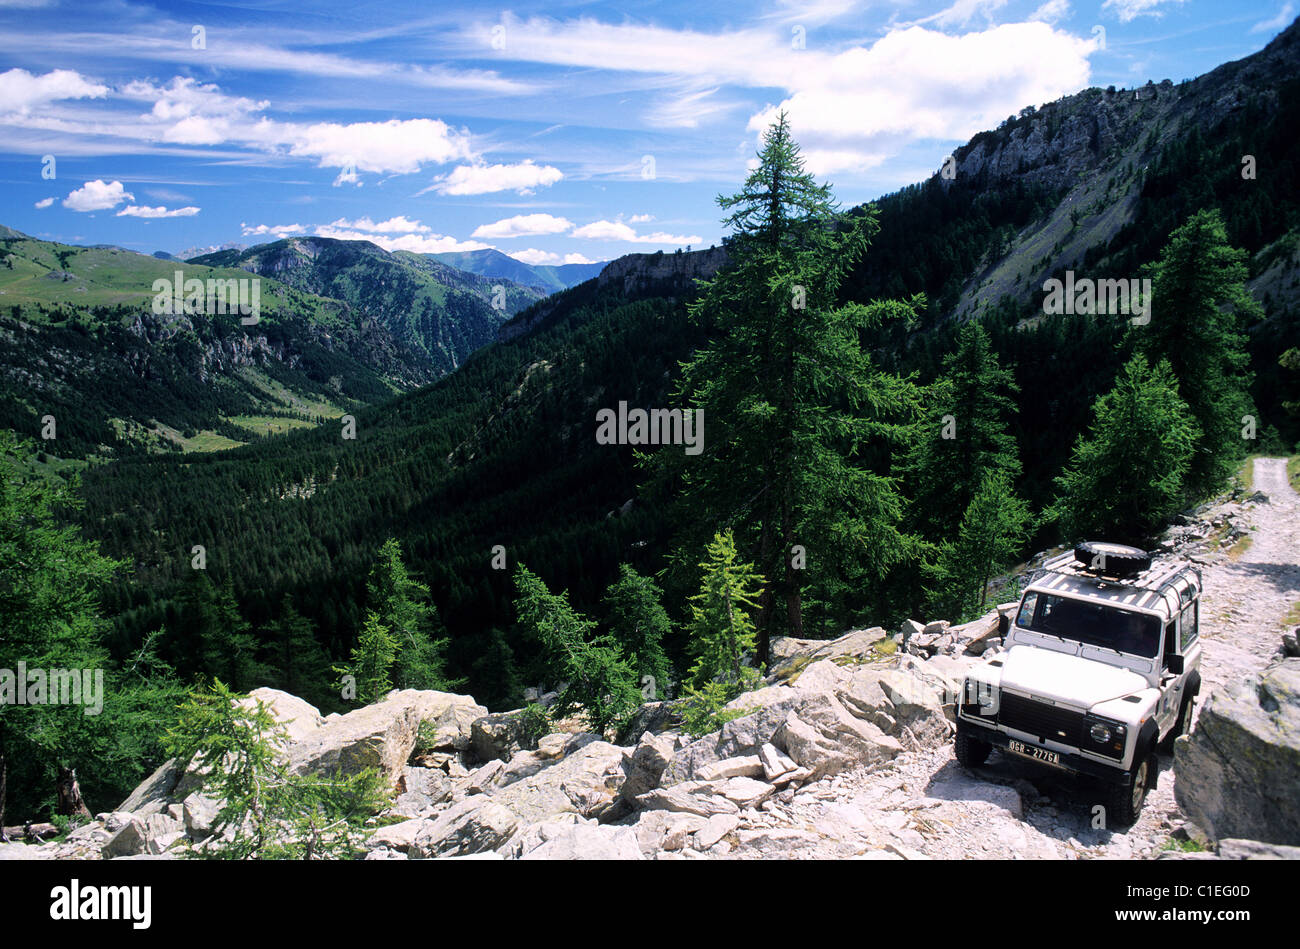 France Alpes Maritimes Mercantour National Park Vallee des Merveilles near Fontanalbe Land Rover from the park guards on a Stock Photo